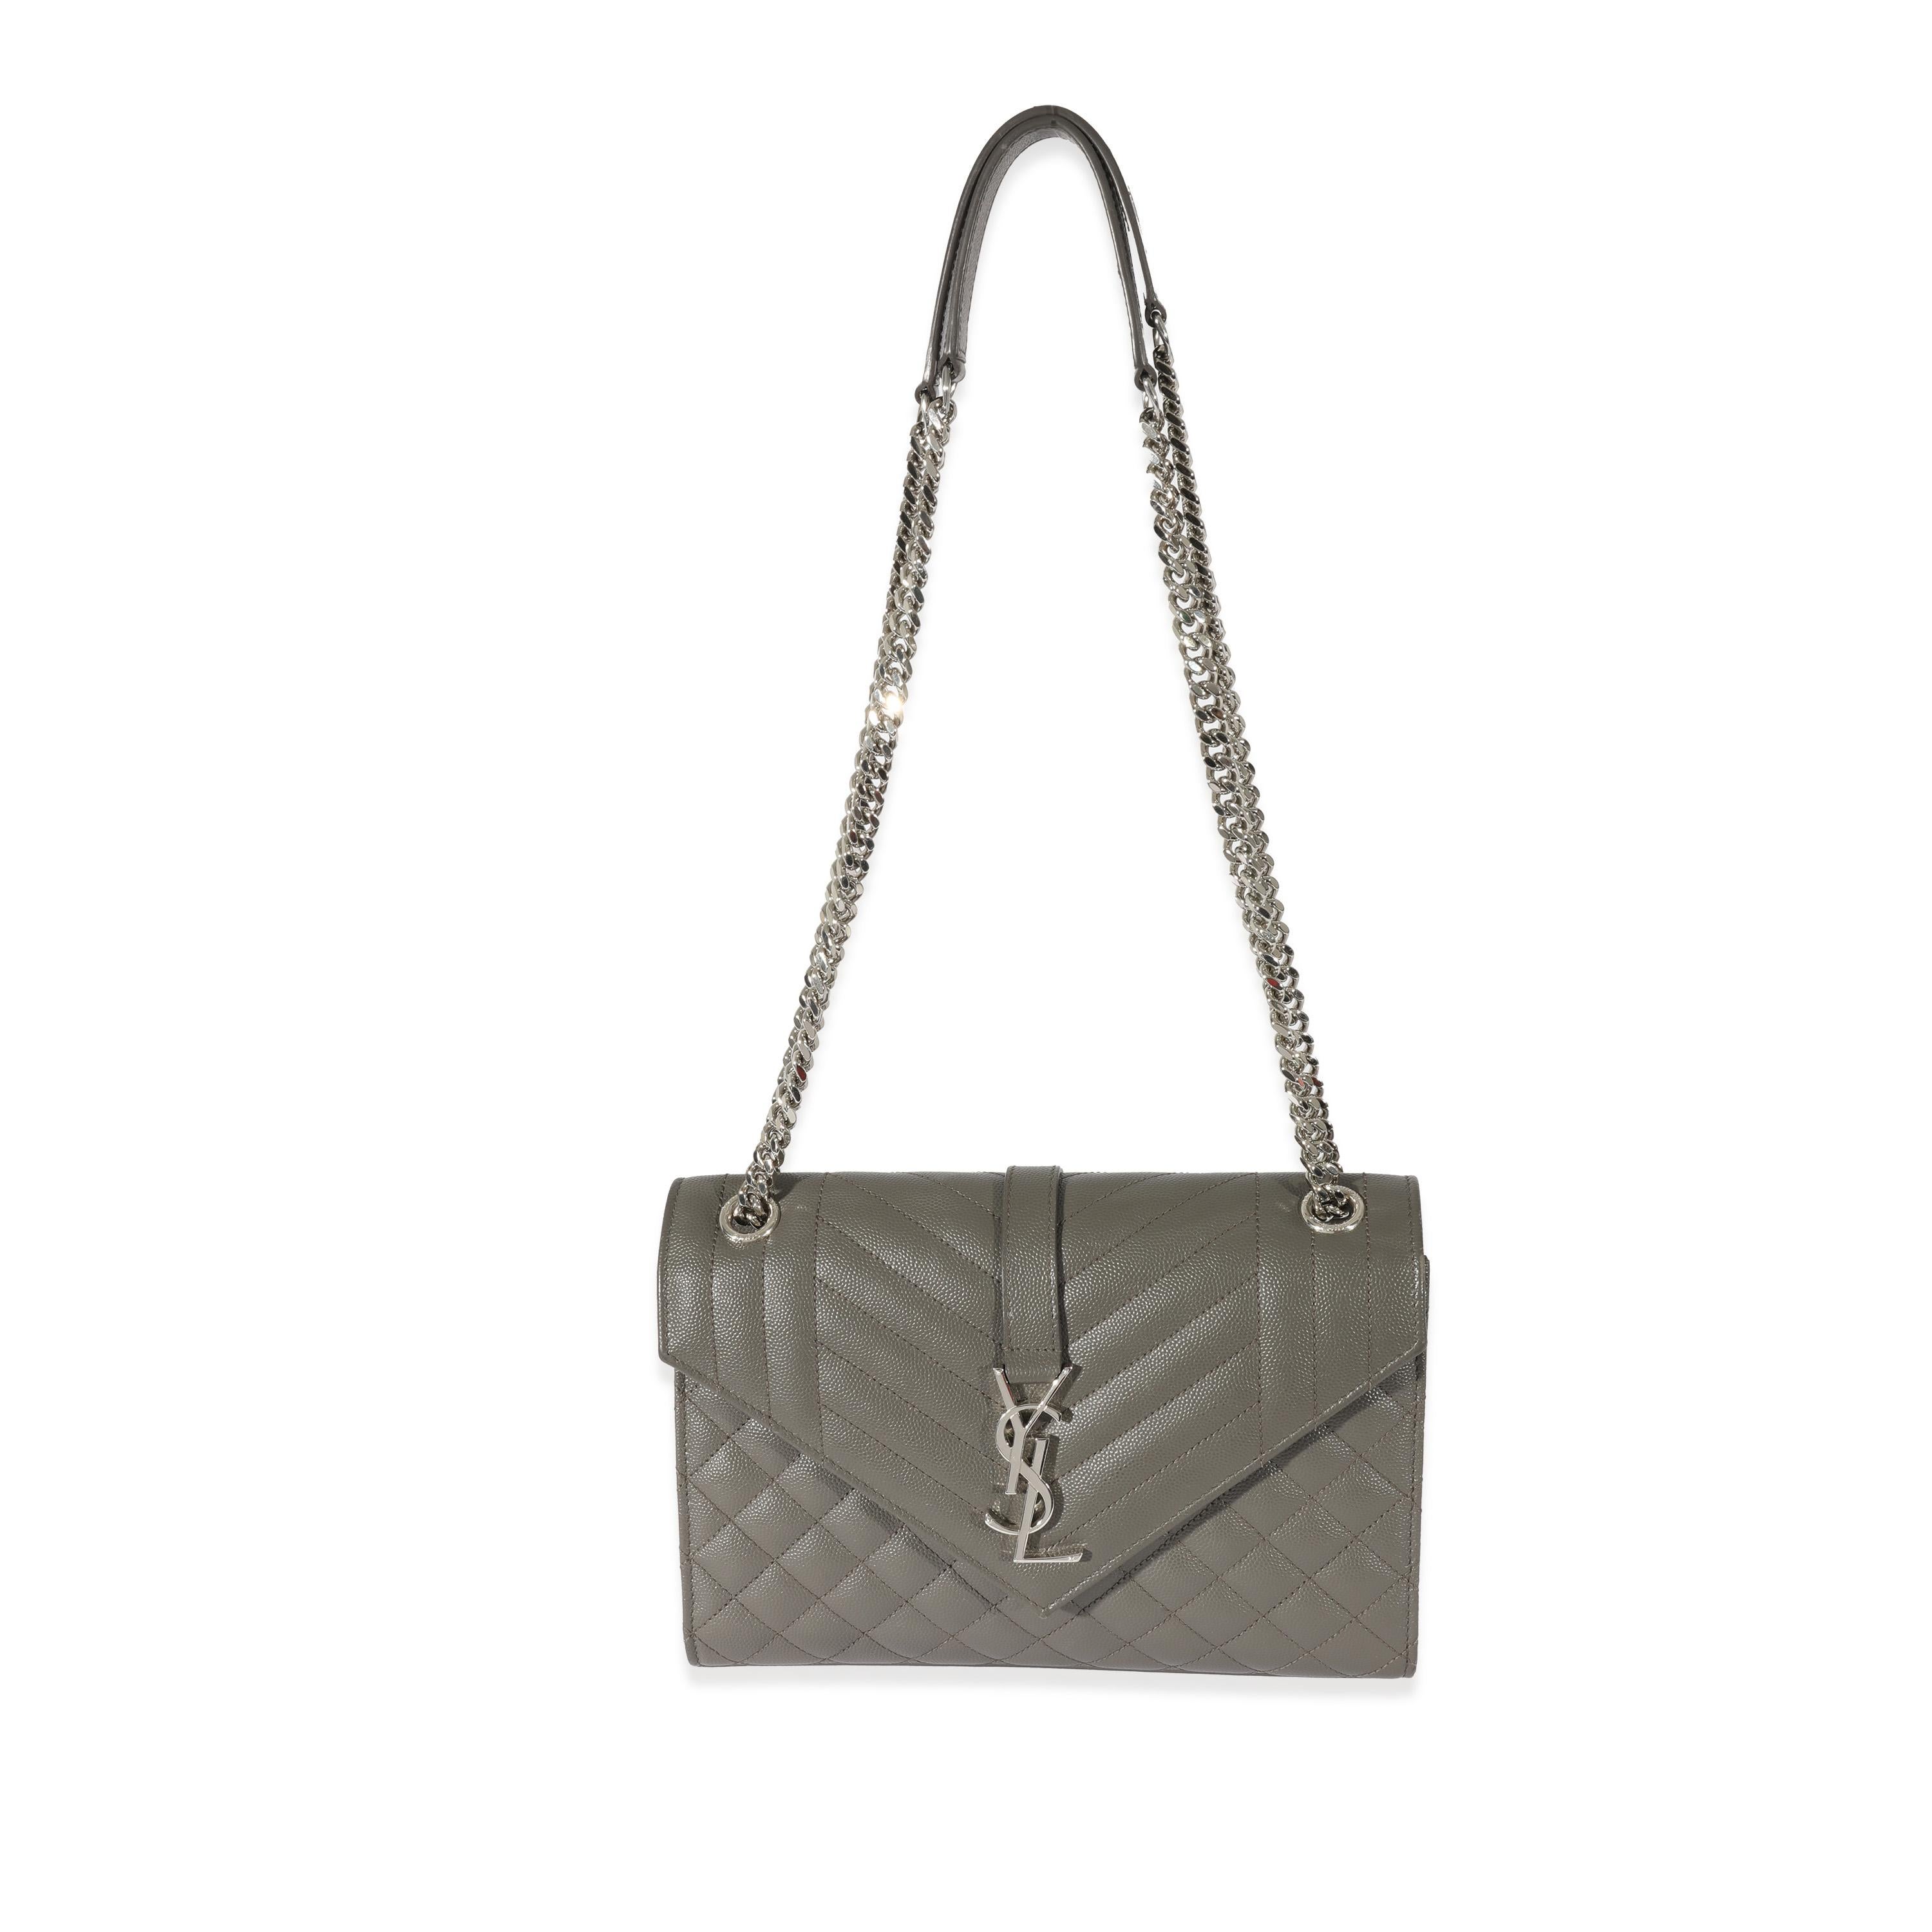 Listing Title: Saint Laurent Grey Grain De Poudre Medium Envelope In Mix Flap Bag
 SKU: 128218
 MSRP: 2950.00
 Condition: Pre-owned 
 Handbag Condition: Very Good
 Condition Comments: Very Good Condition. Exterior light scuffing Scratching at